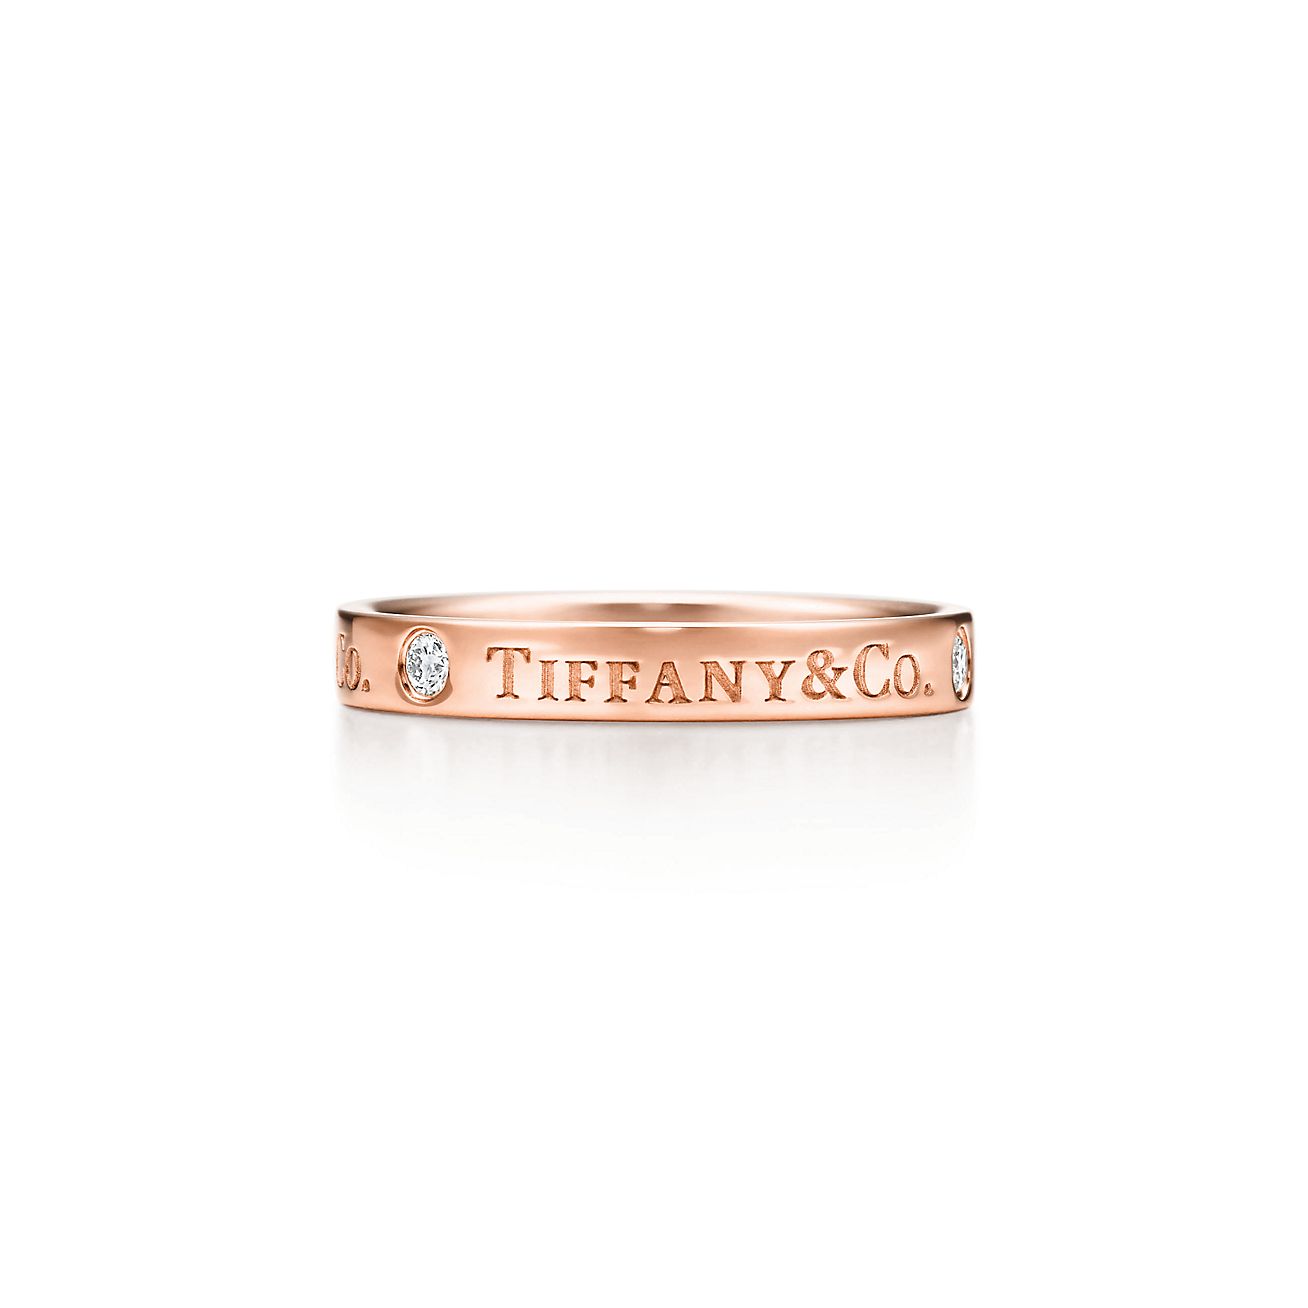 Tiffany Forever Wedding Band Ring in Yellow Gold, 4.5 mm Wide | Tiffany & Co .